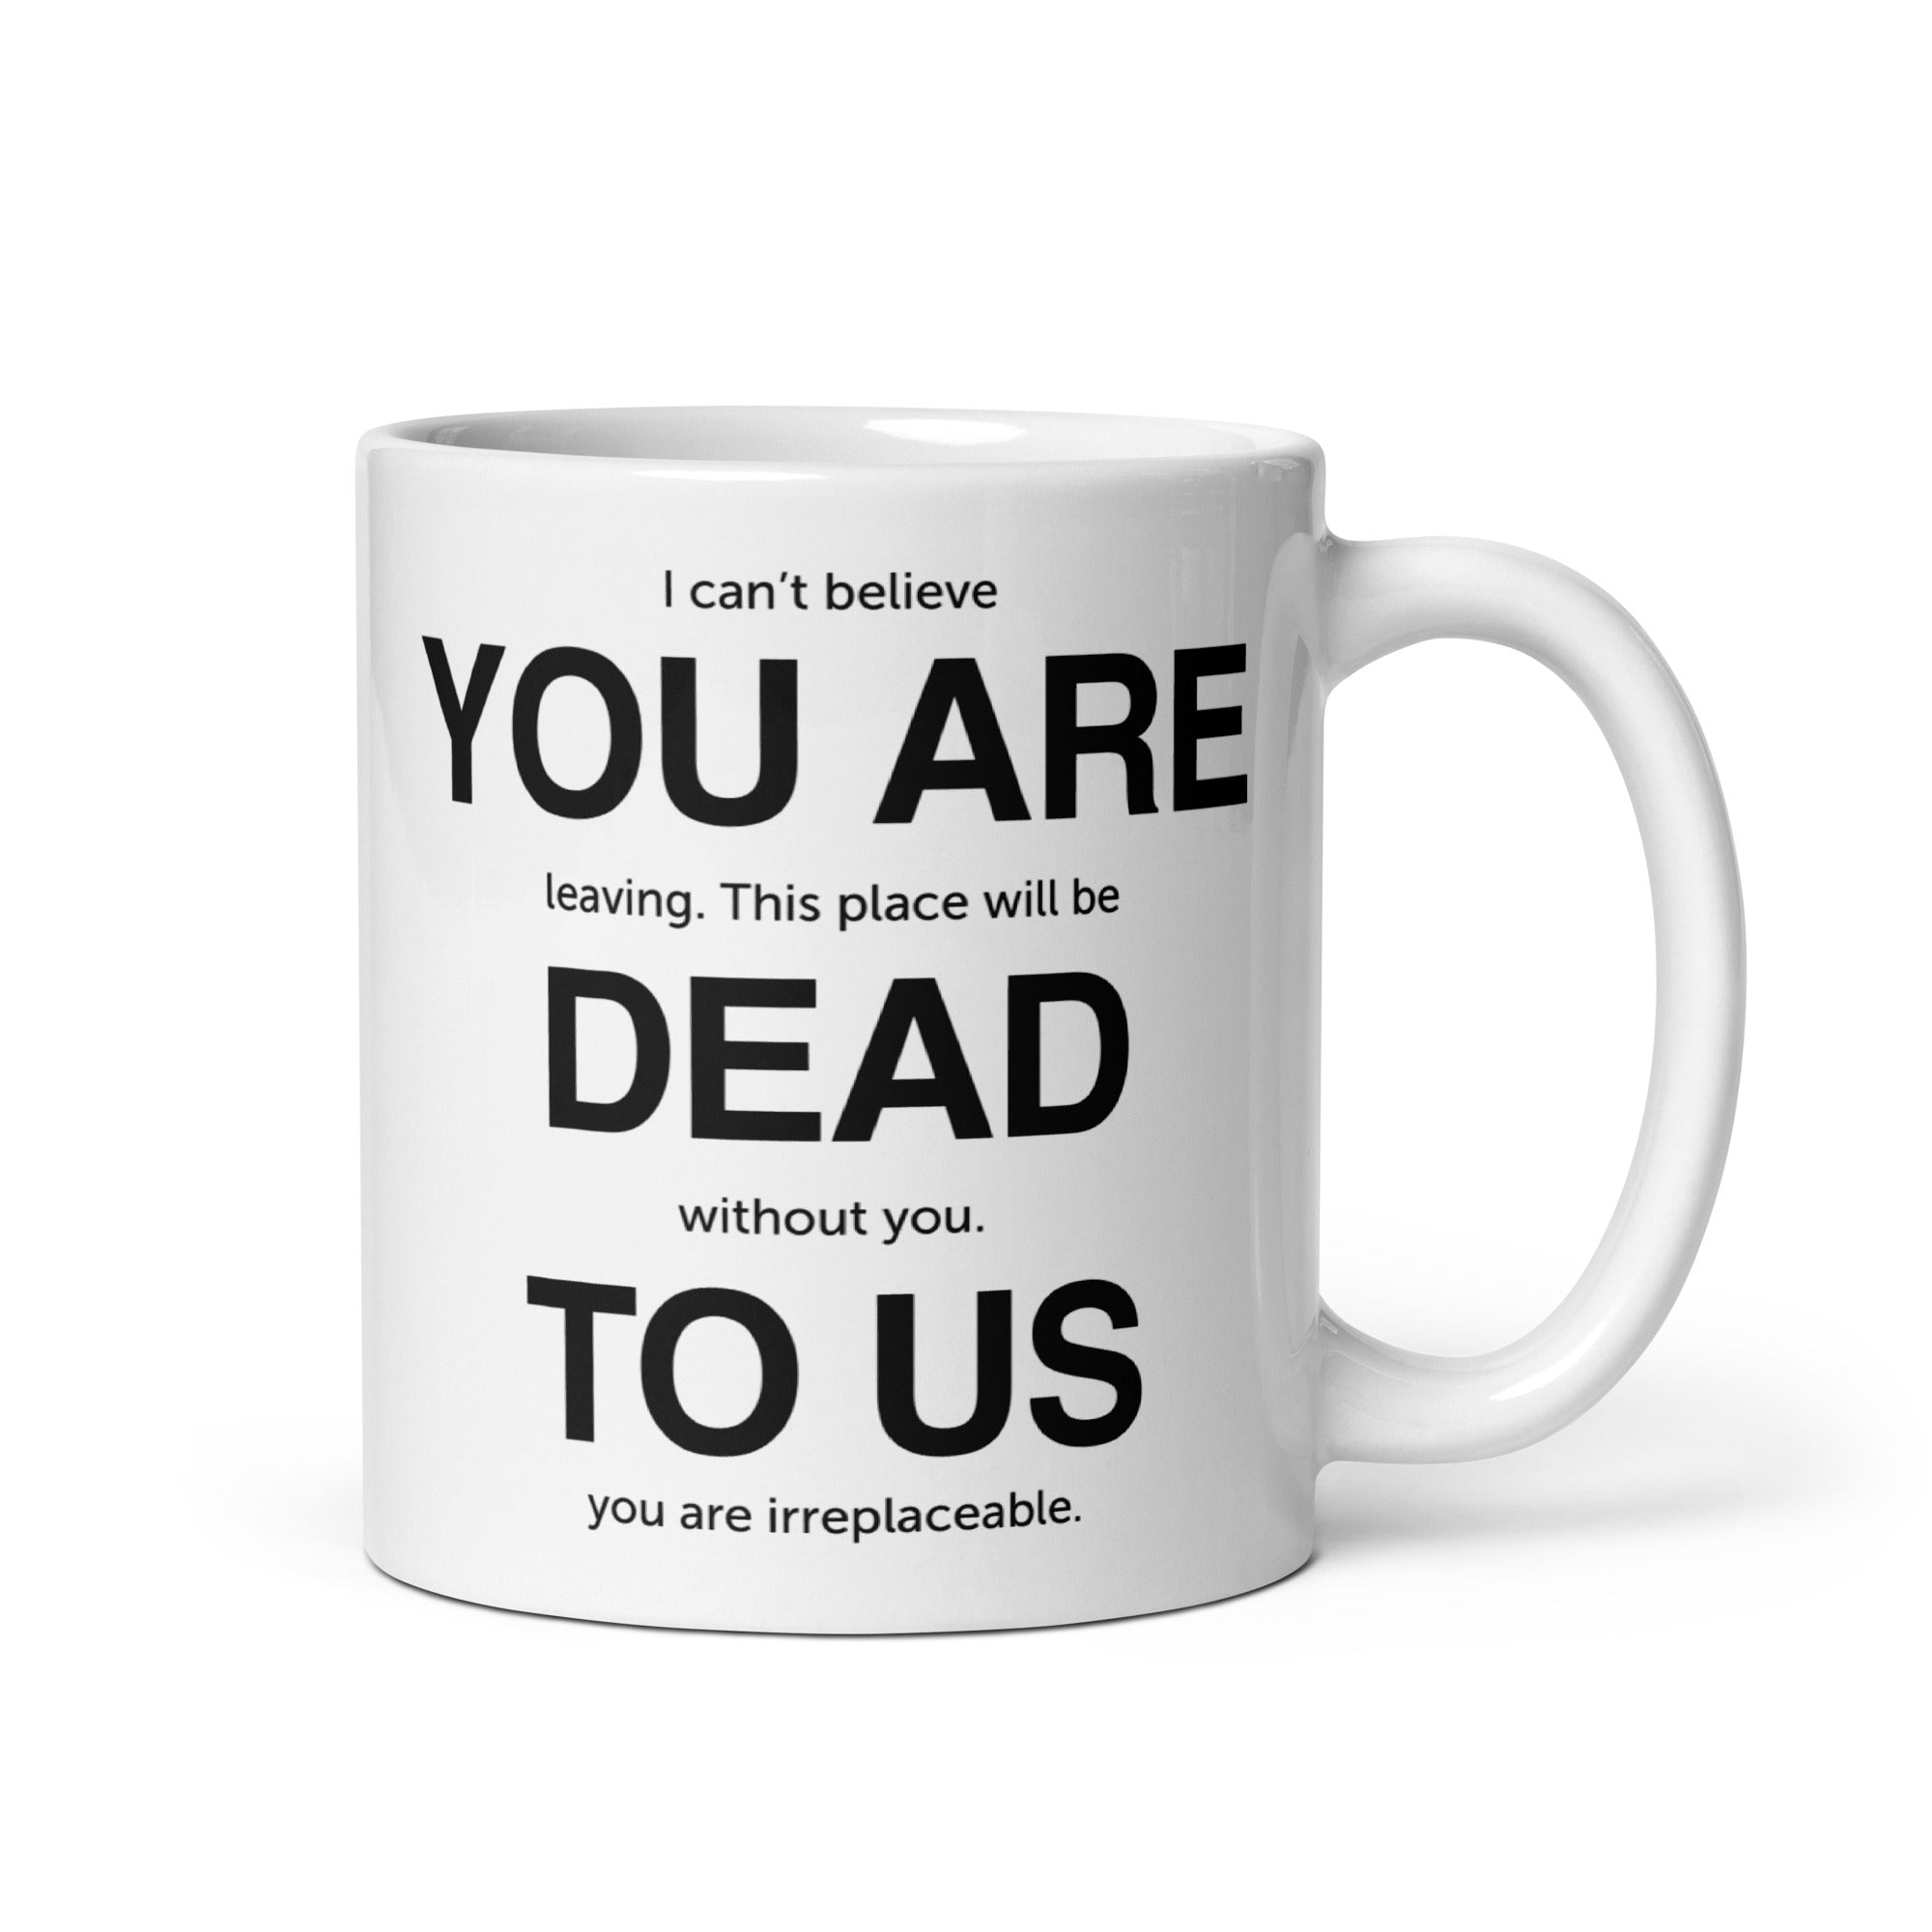 you-are-dead-to-us-mug